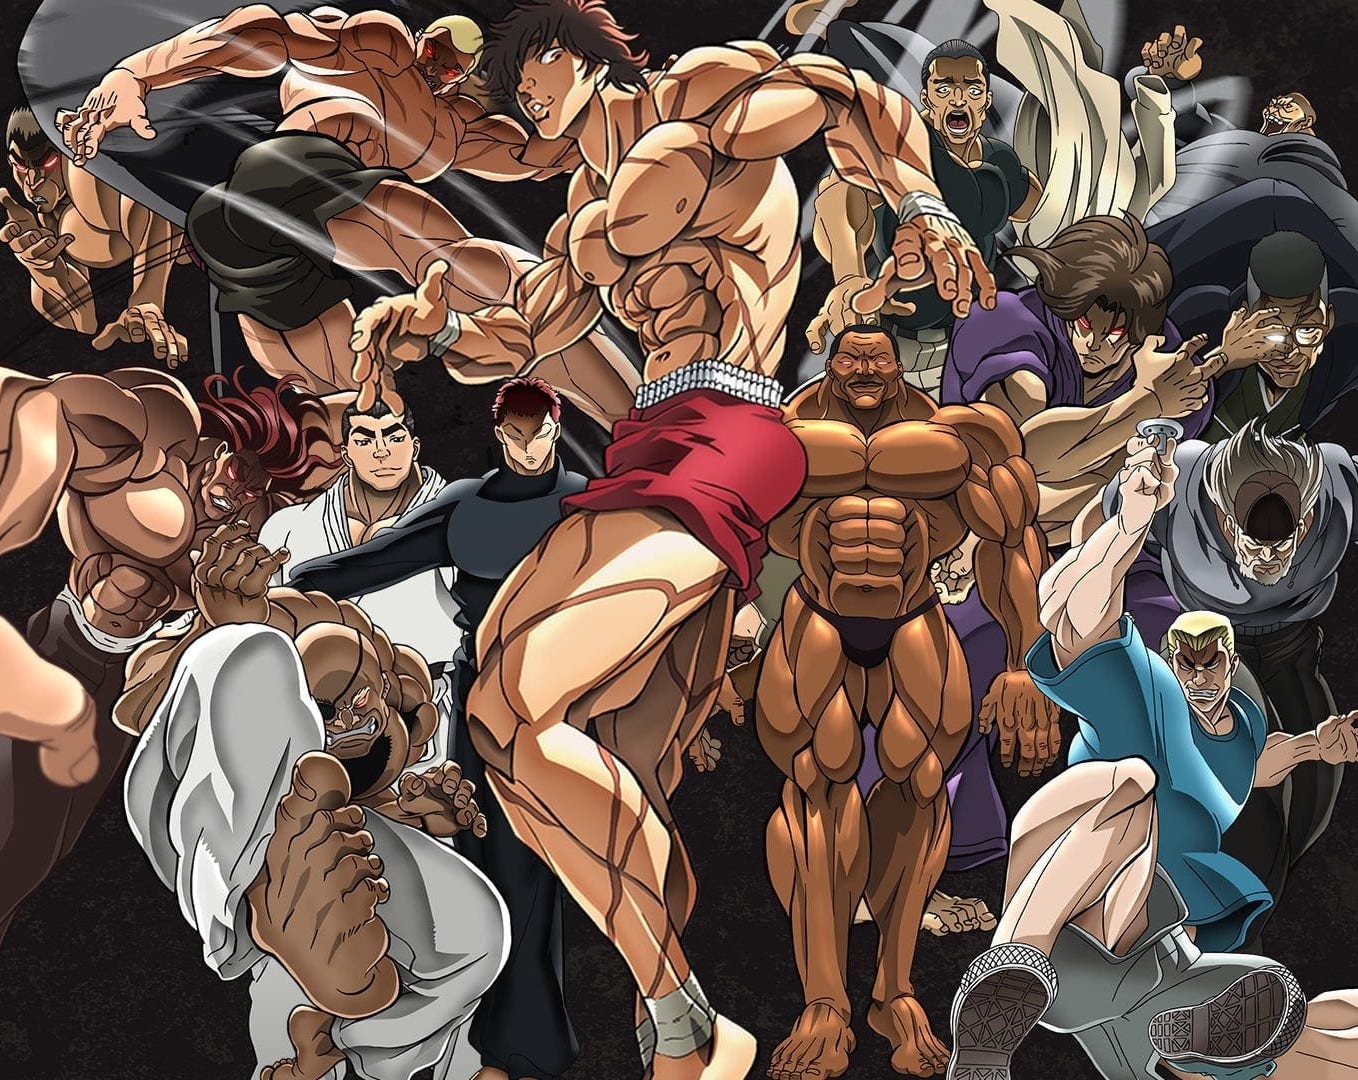 The cast of giant muscled men from Baki.